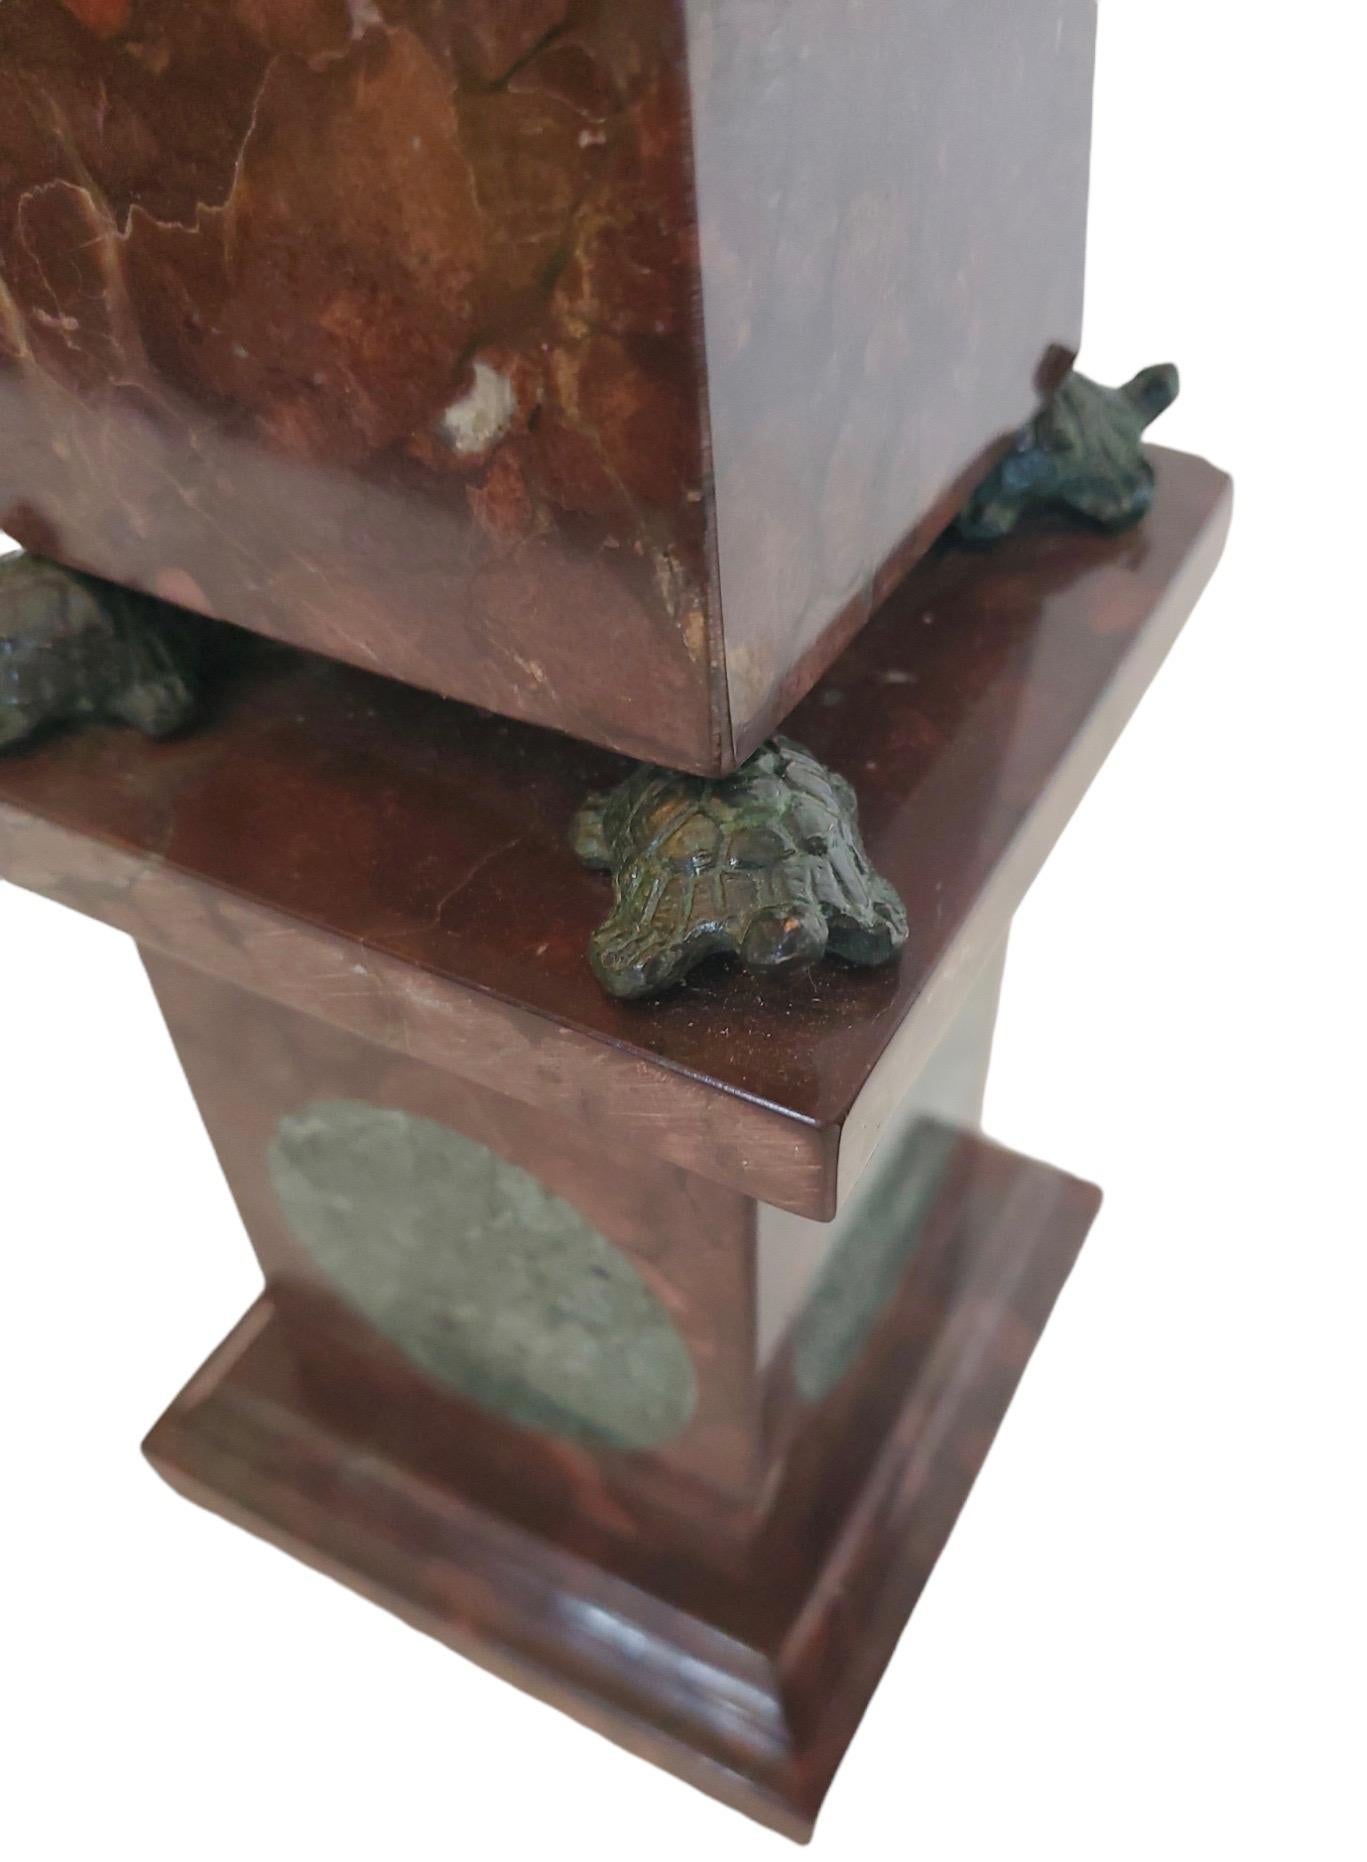 Circa 1900s.  Rouge marble with cast bronze turtles.  Excellent condition.  